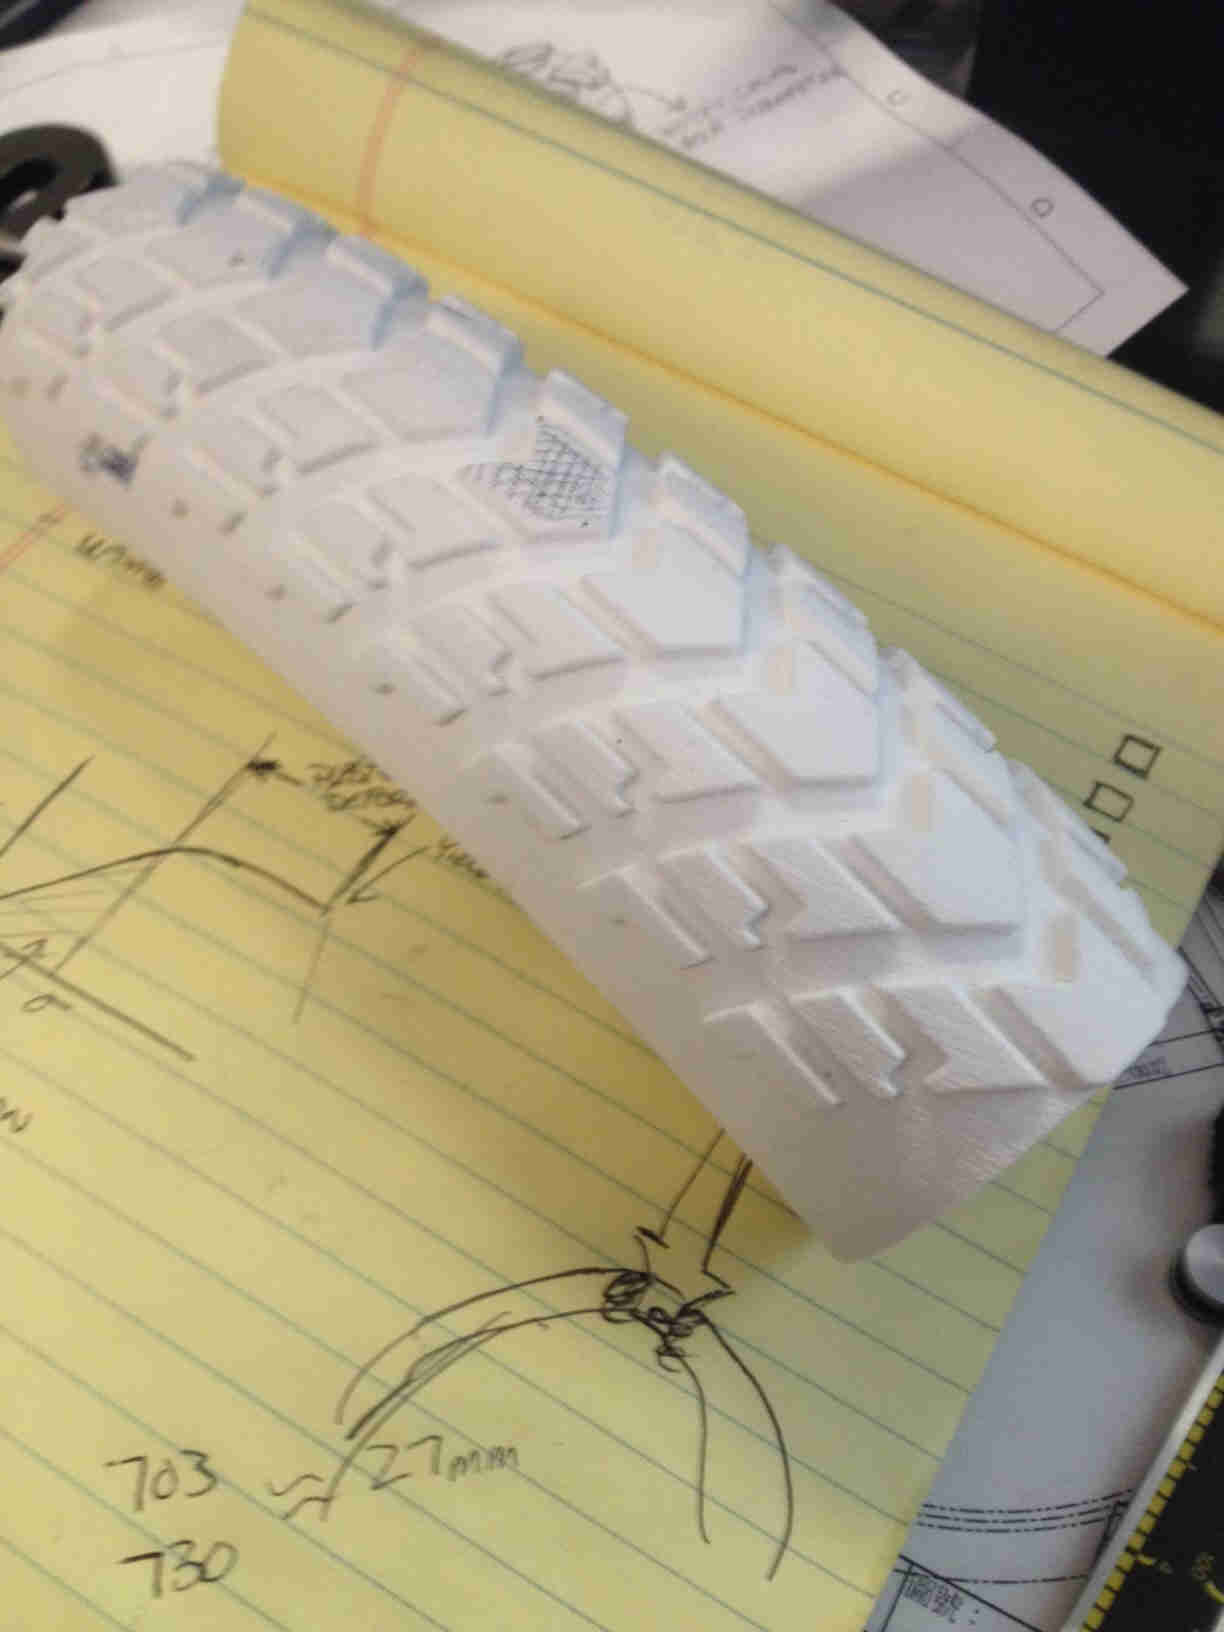 Downward view of a white bike tire cut-out, with the tread facing up, laying across a yellow legal pad - 1st